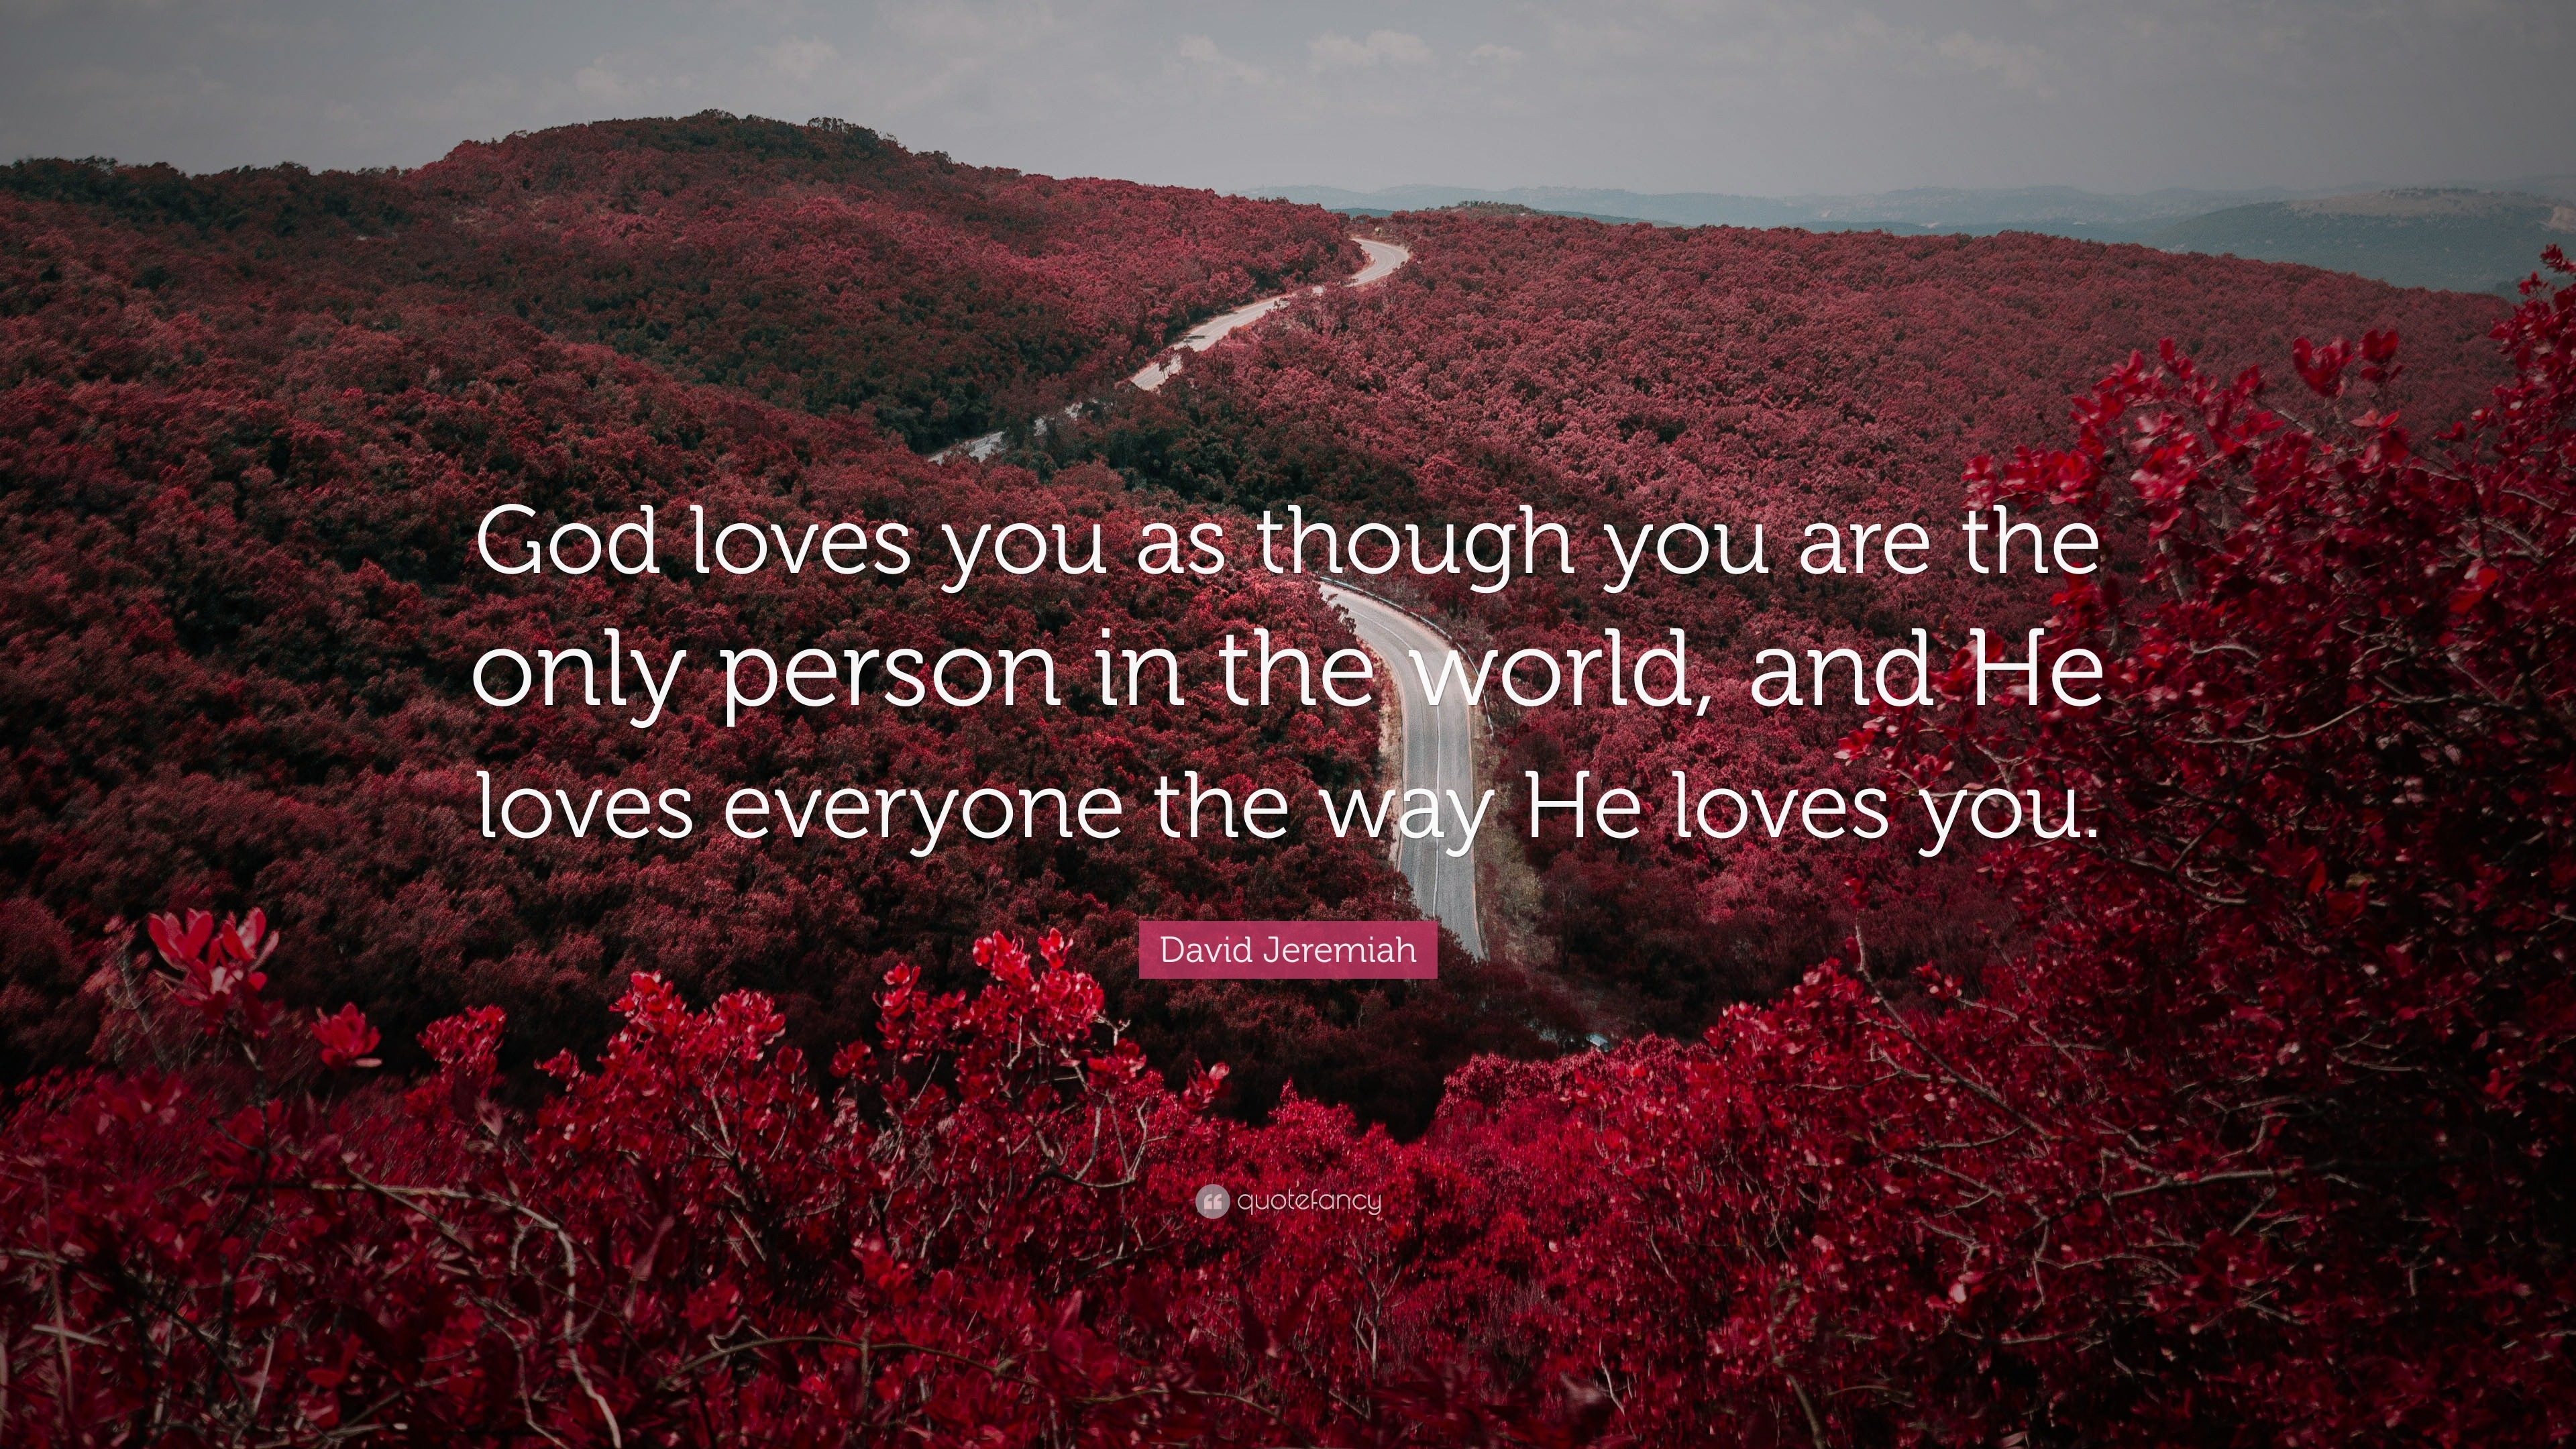 David Jeremiah Quote “God loves you as though you are the only person in